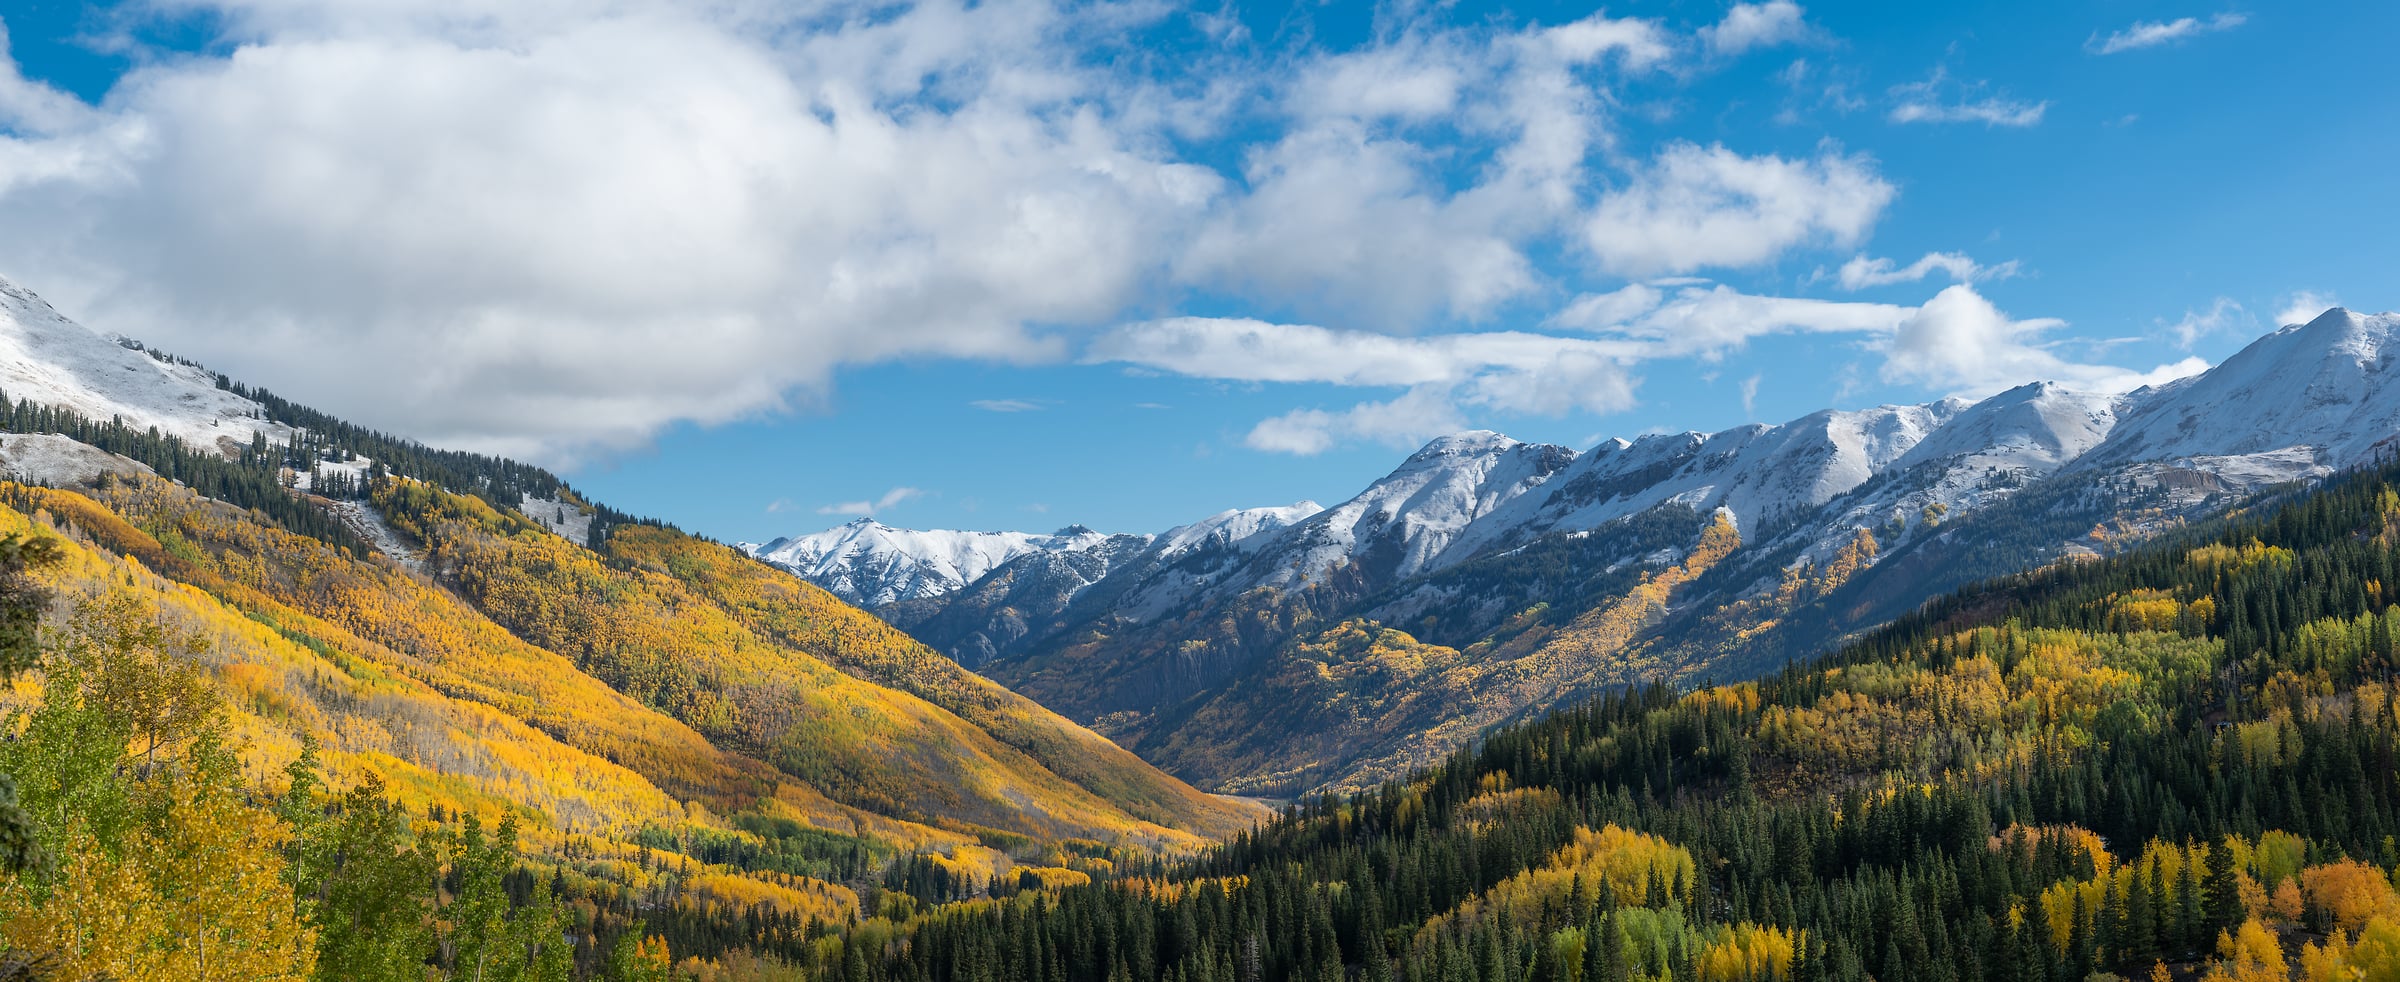 410 megapixels! A very high resolution, large-format VAST photo print of mountains with a valley during autumn with fall foliage and a blue sky with puffy clouds; landscape photograph created by Greg Probst in Red Mountain Pass, Colorado.